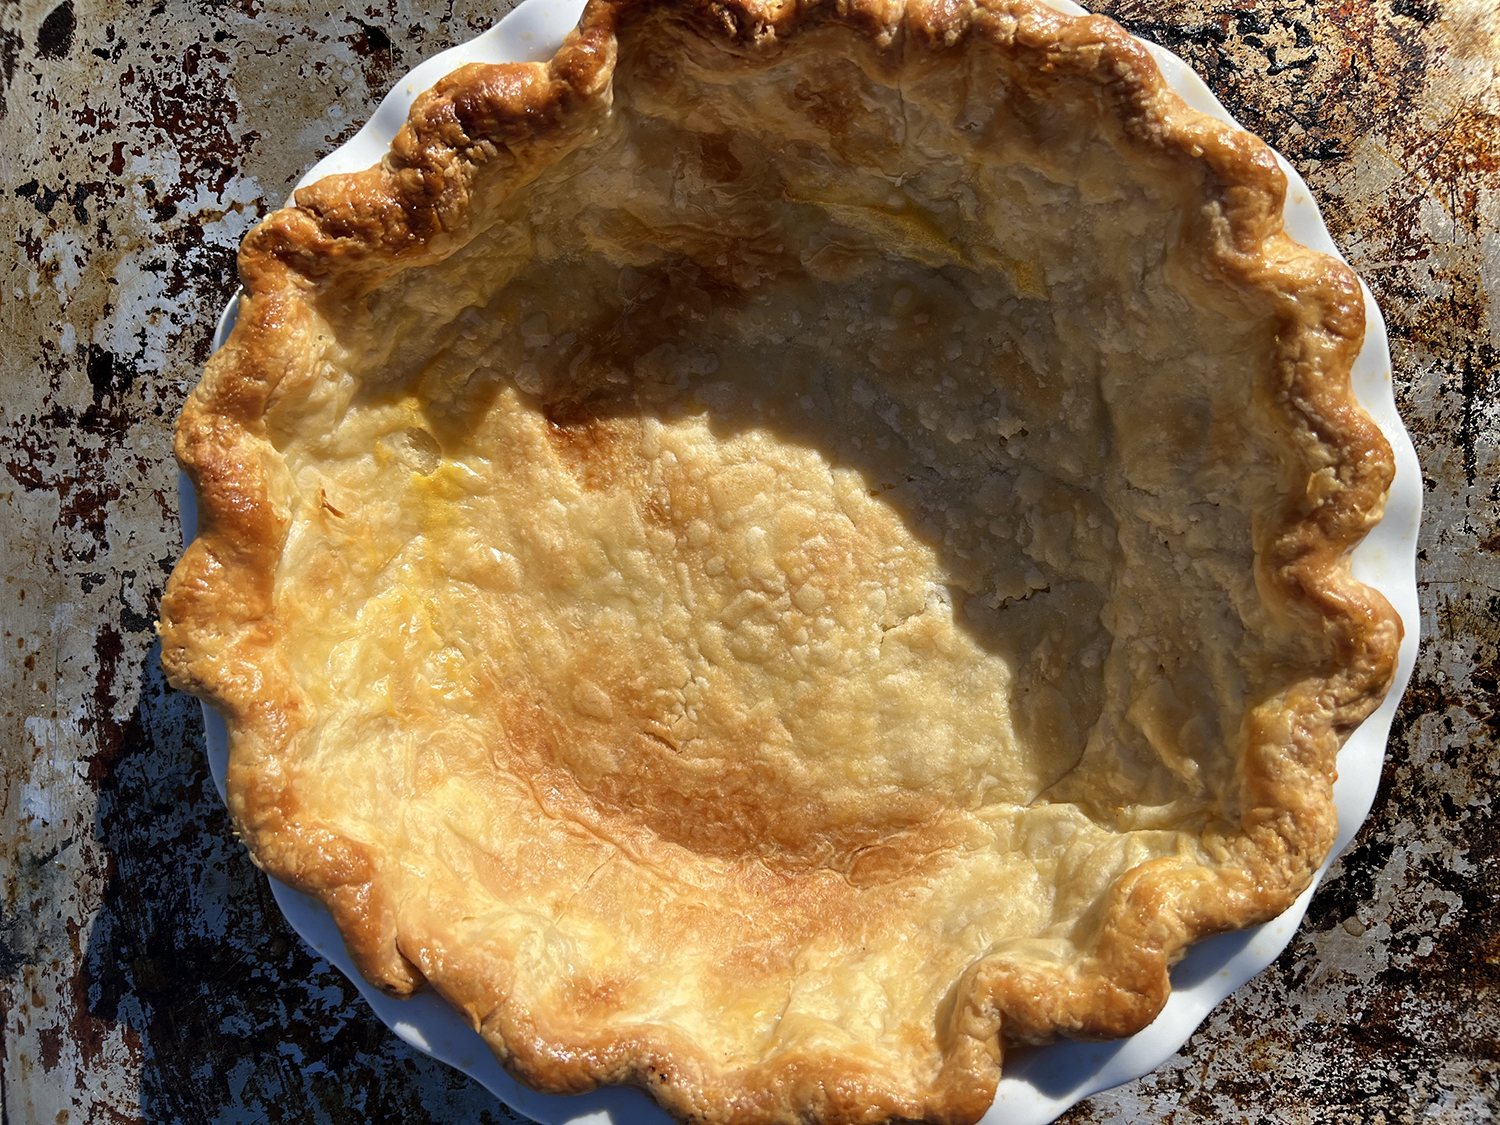 a fully baked pie crust prior to filling